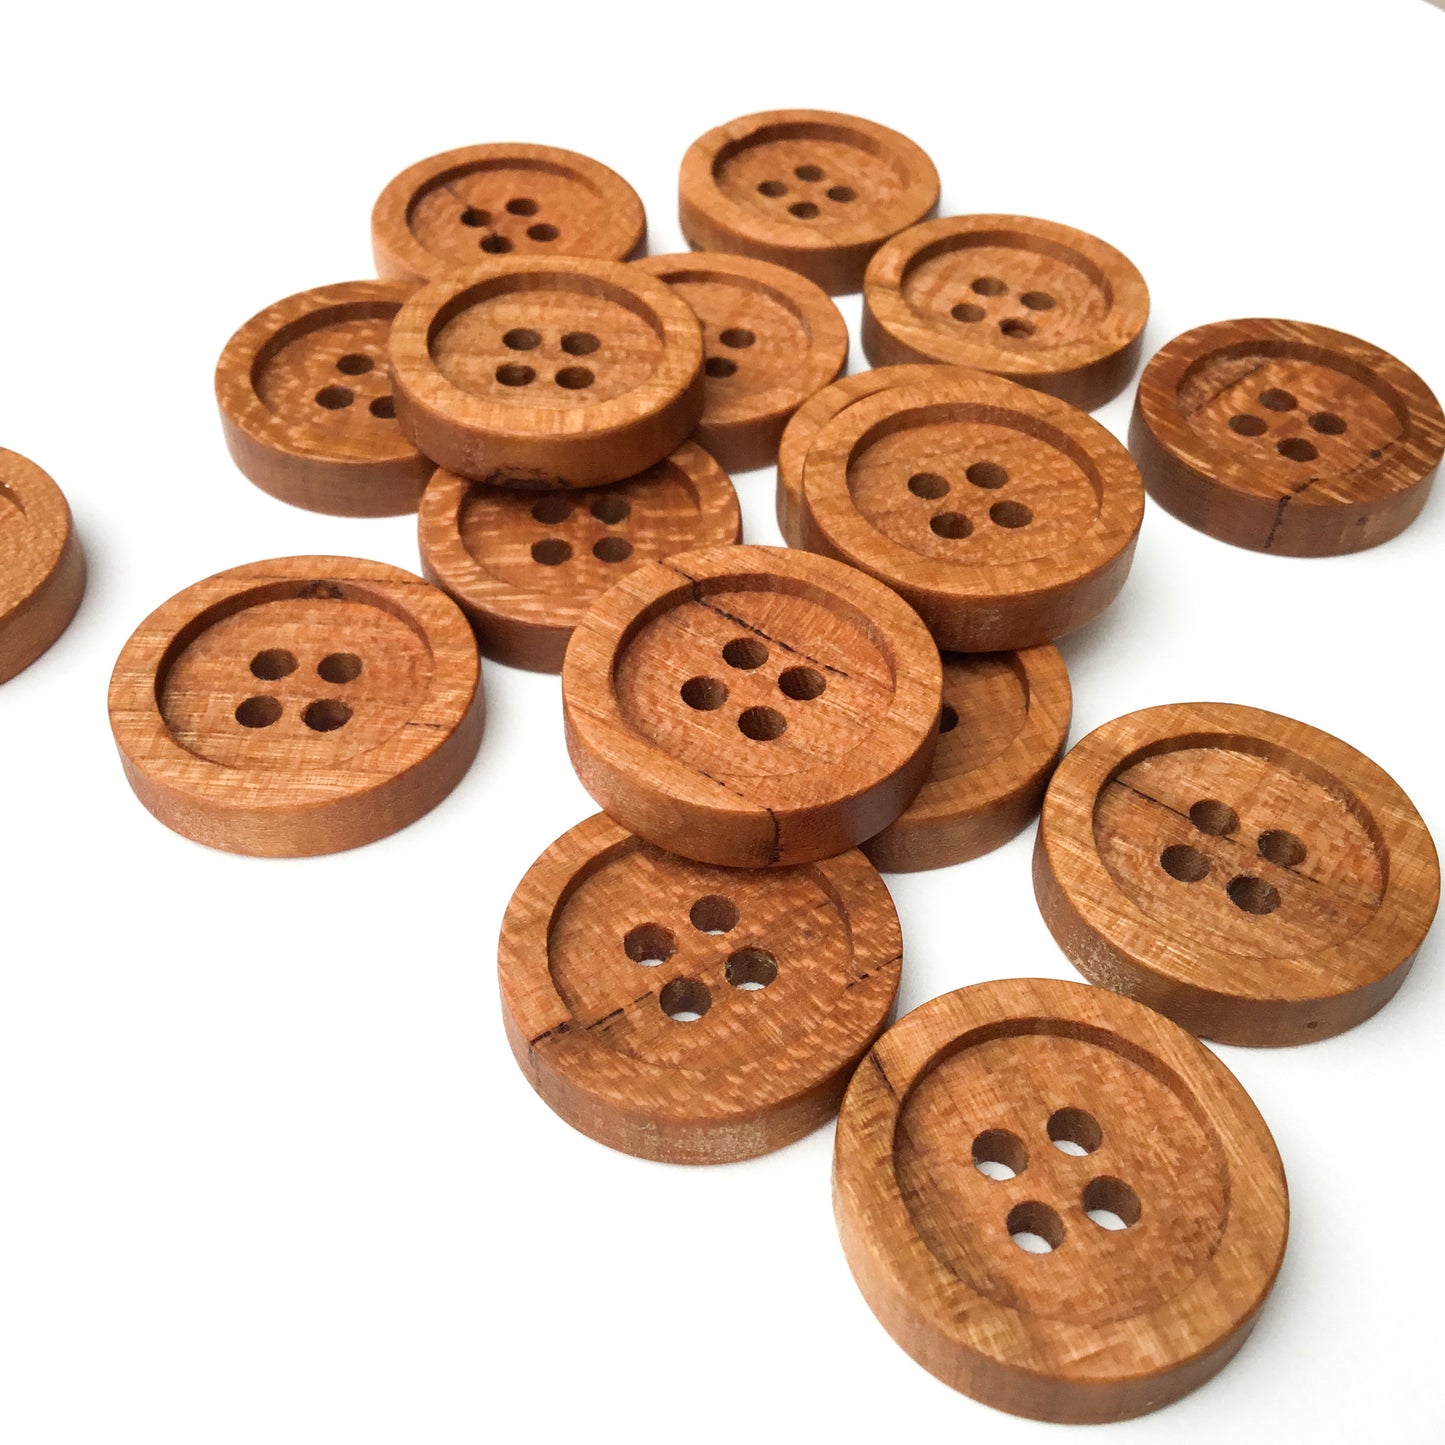 Four Hole Inset Button - Cherry Wood  1"